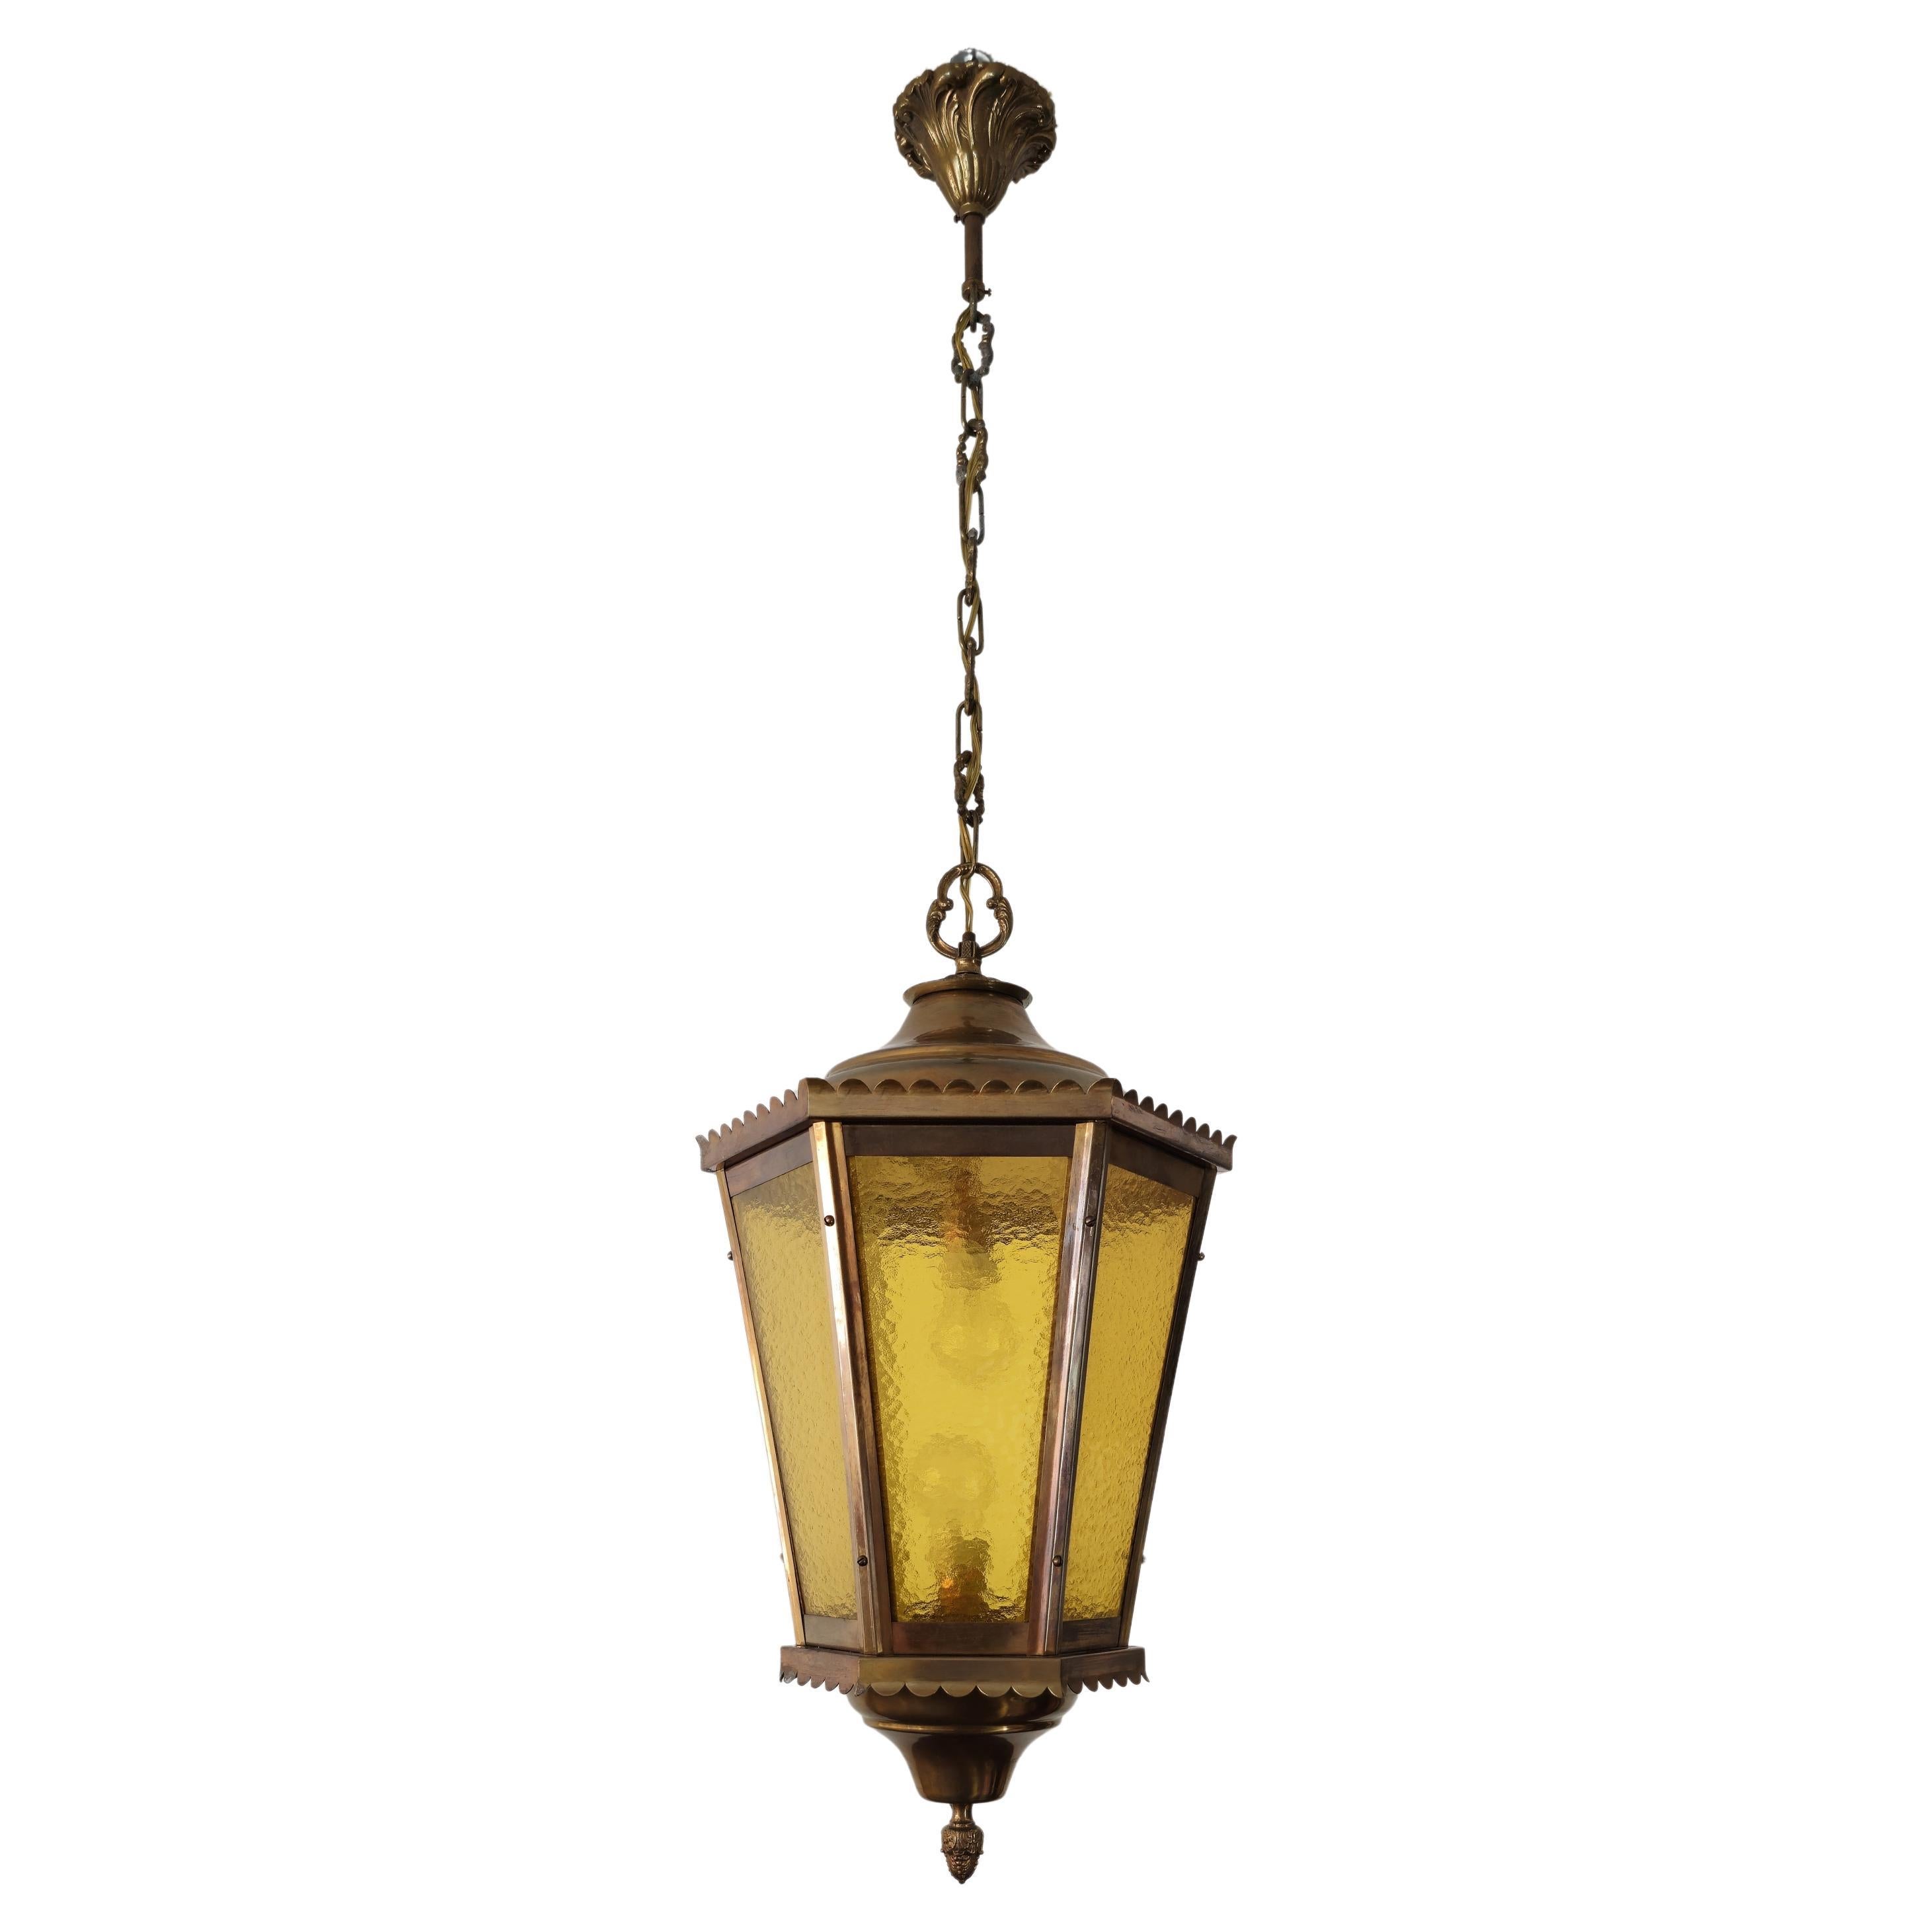  Pendant Lantern Suspension Lamp Brass Glass Cathedral Midcentury Italy 1940s